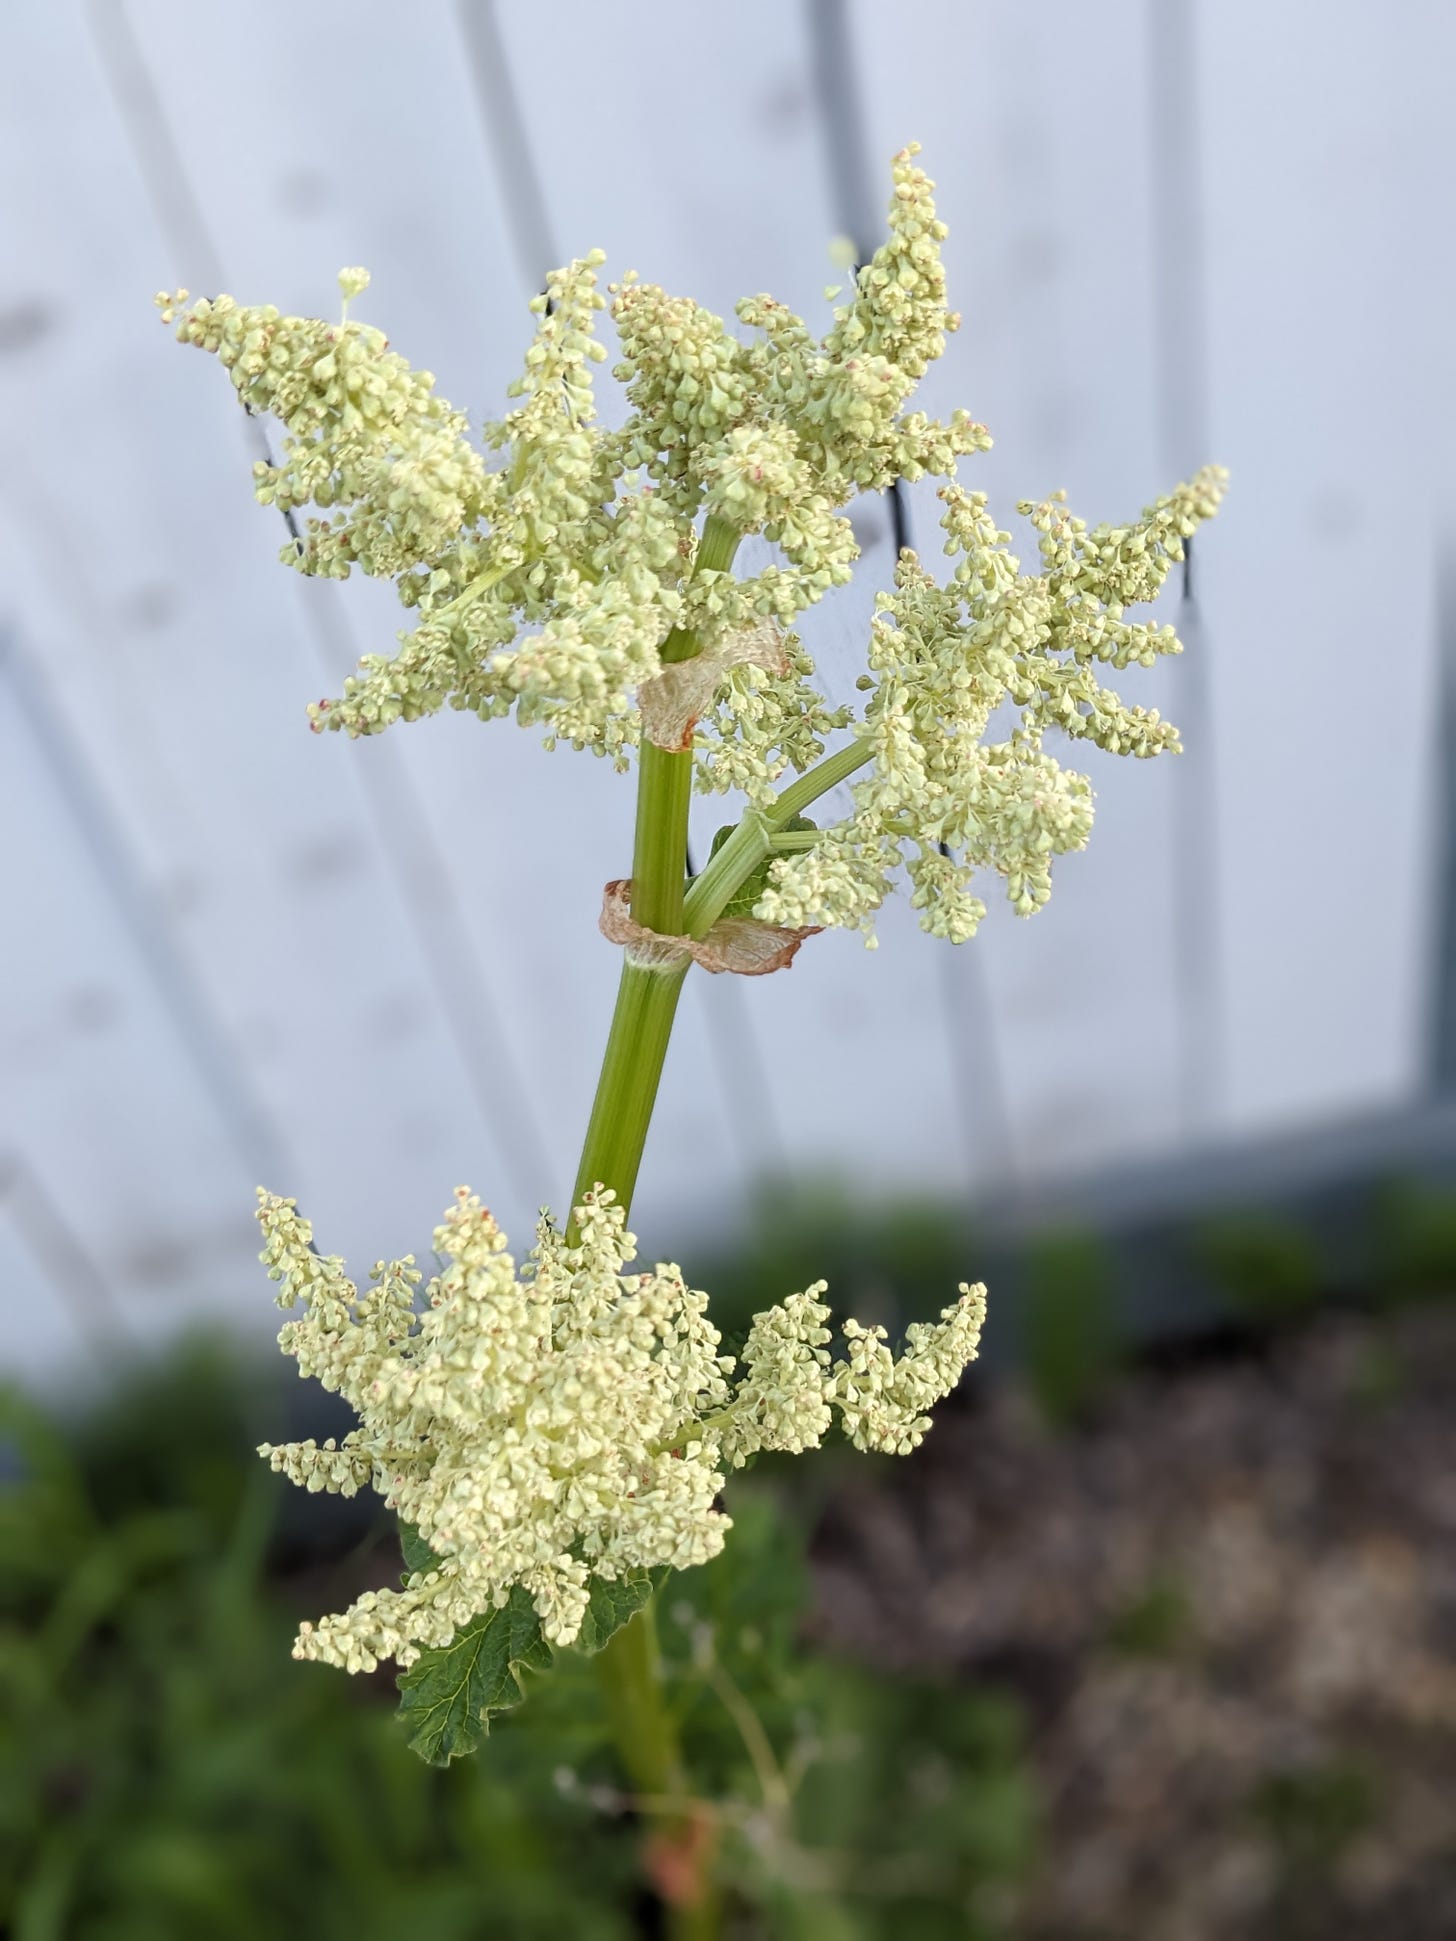 closeup of a flowering rhubarb stalk. the thin green stem supports three clumps of tiny light-green seed pods